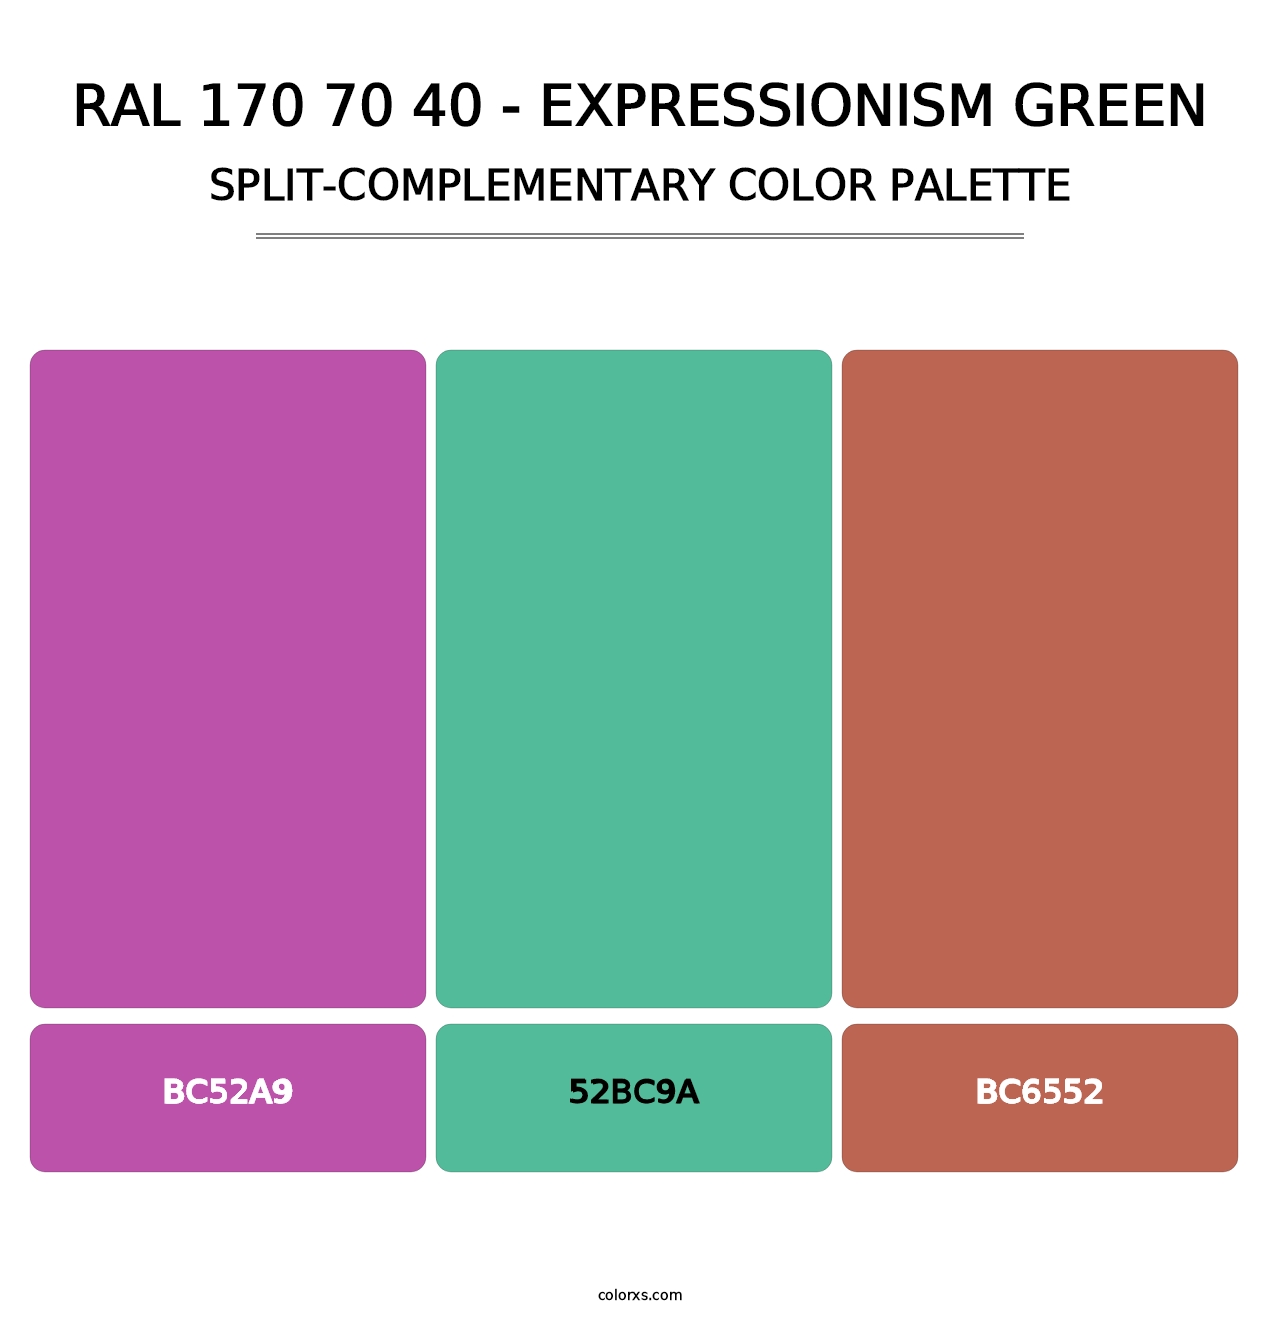 RAL 170 70 40 - Expressionism Green - Split-Complementary Color Palette